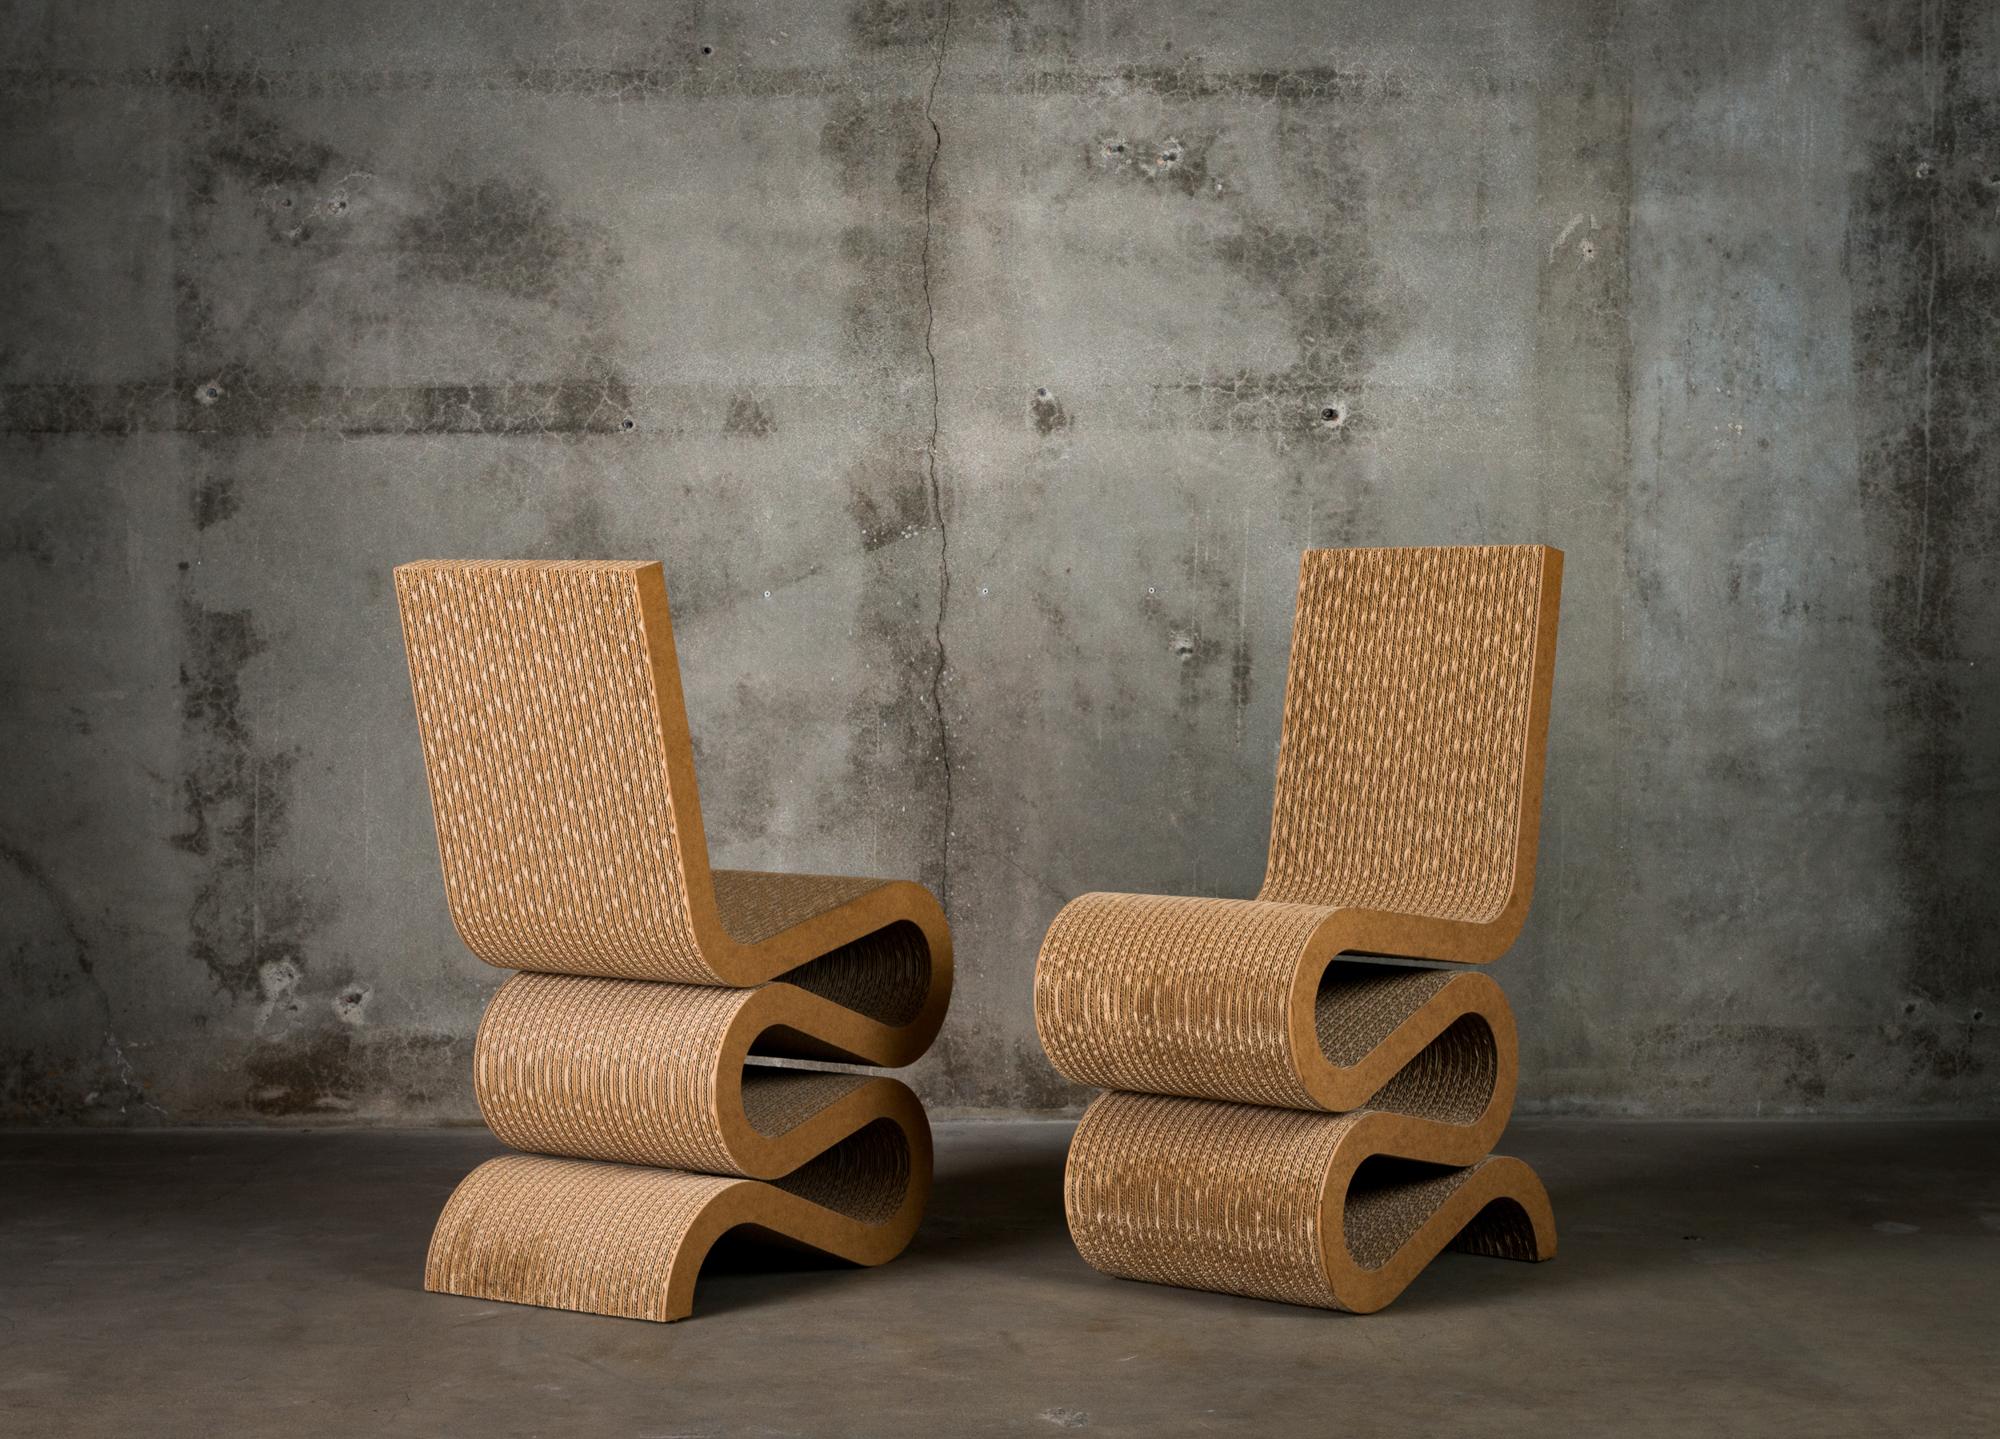 frank gehry cardboard chairs